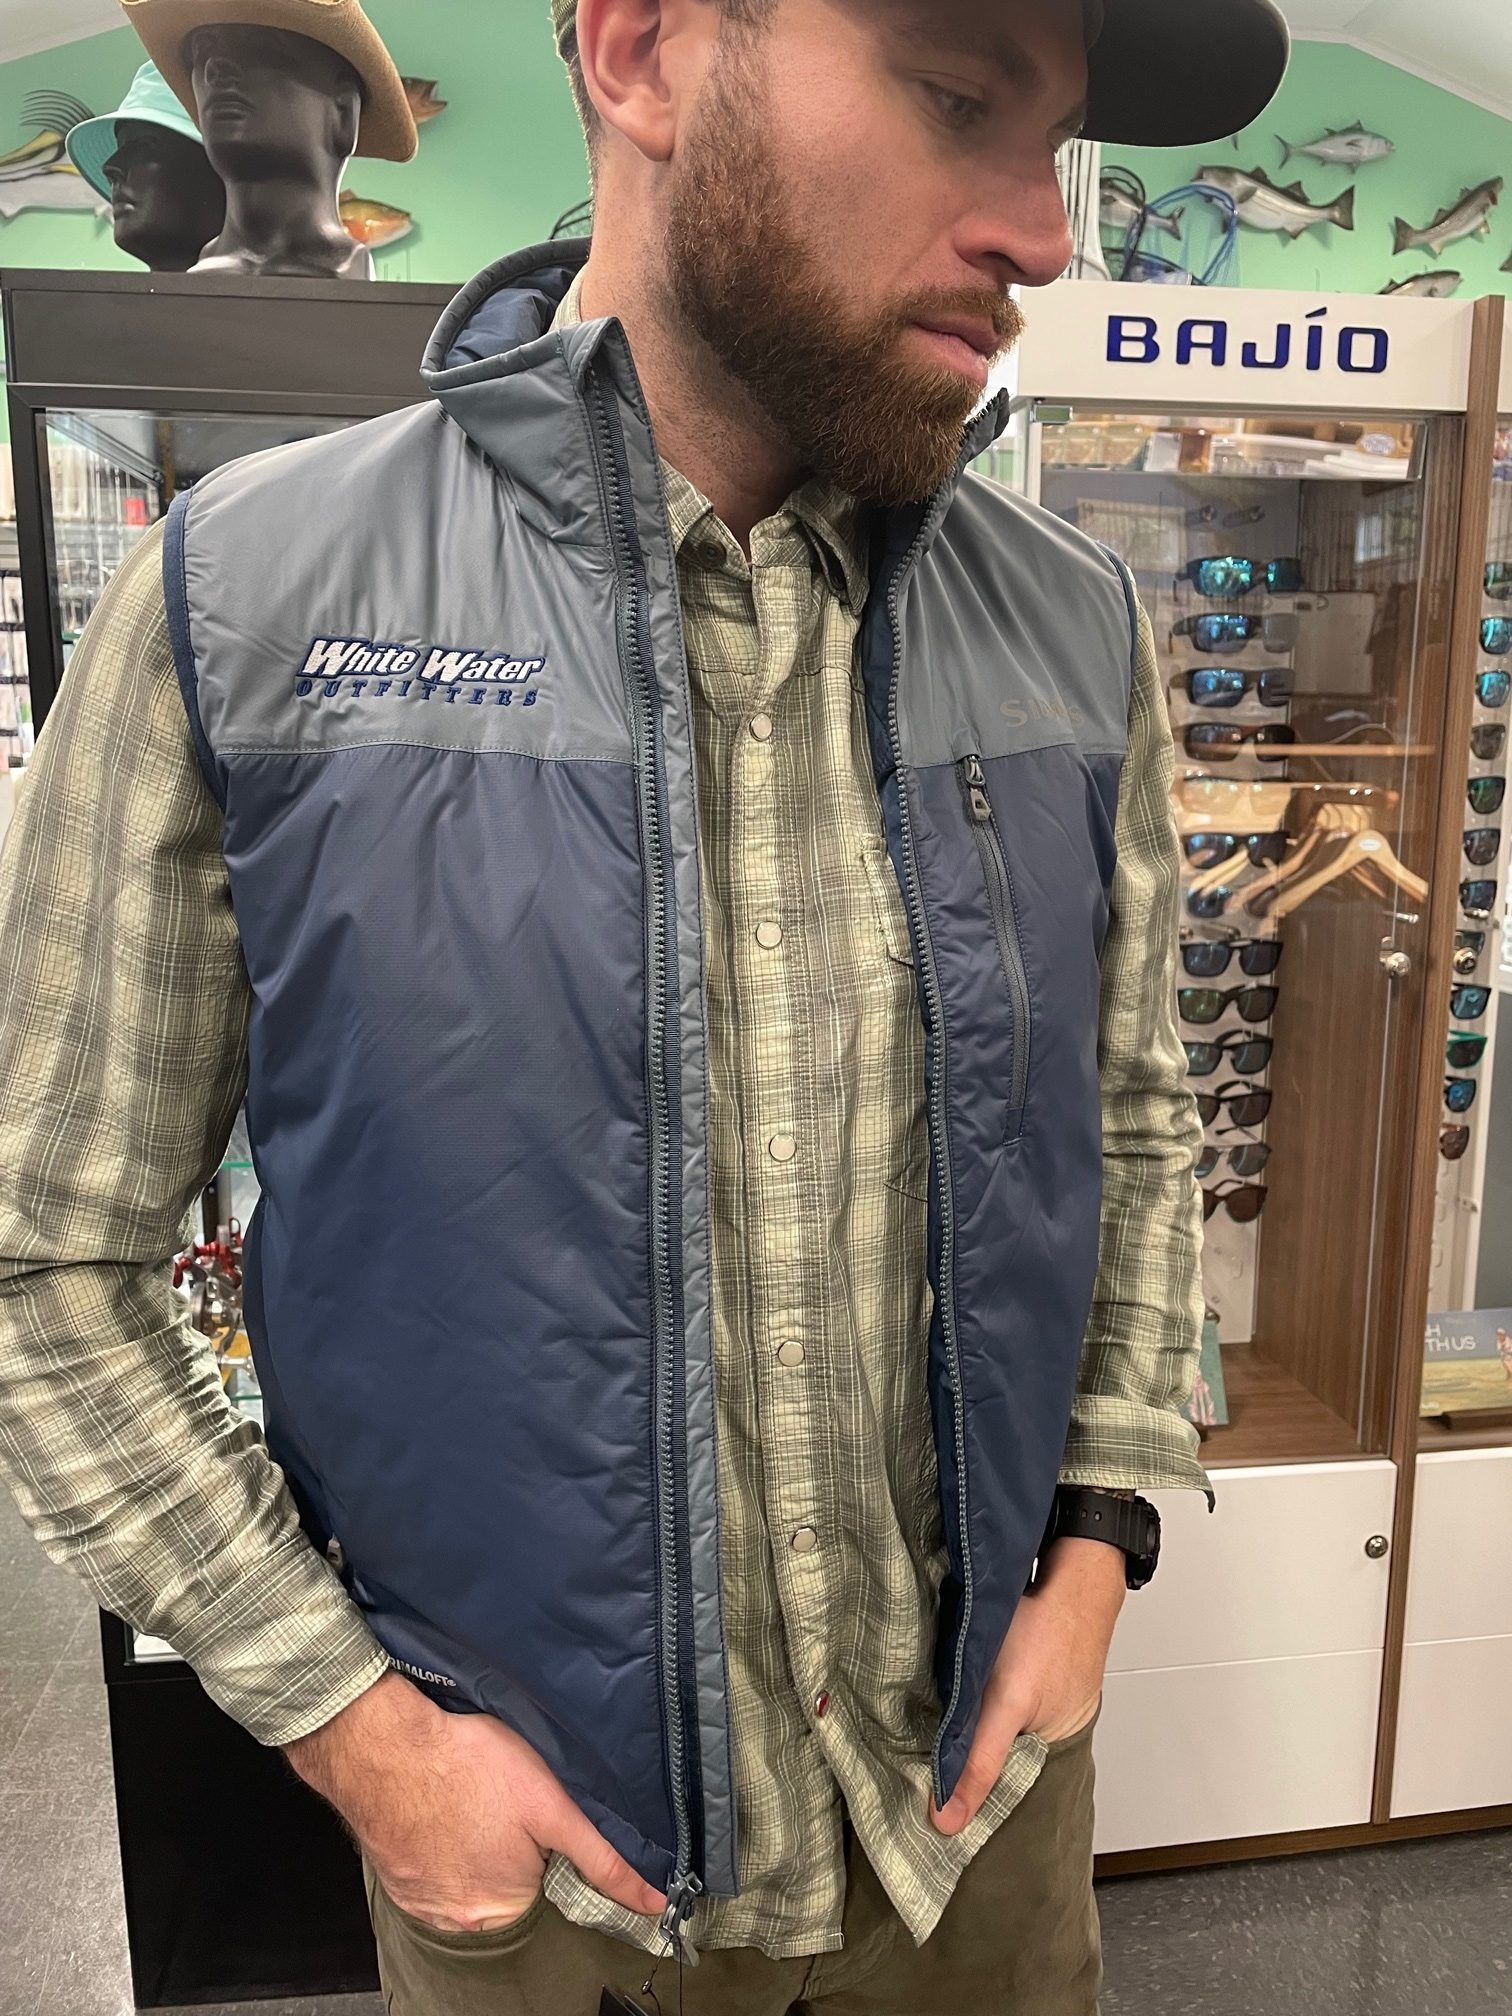 White Water Outfitters has partnered with Simms on some of its new apparel, like this insulated vest.